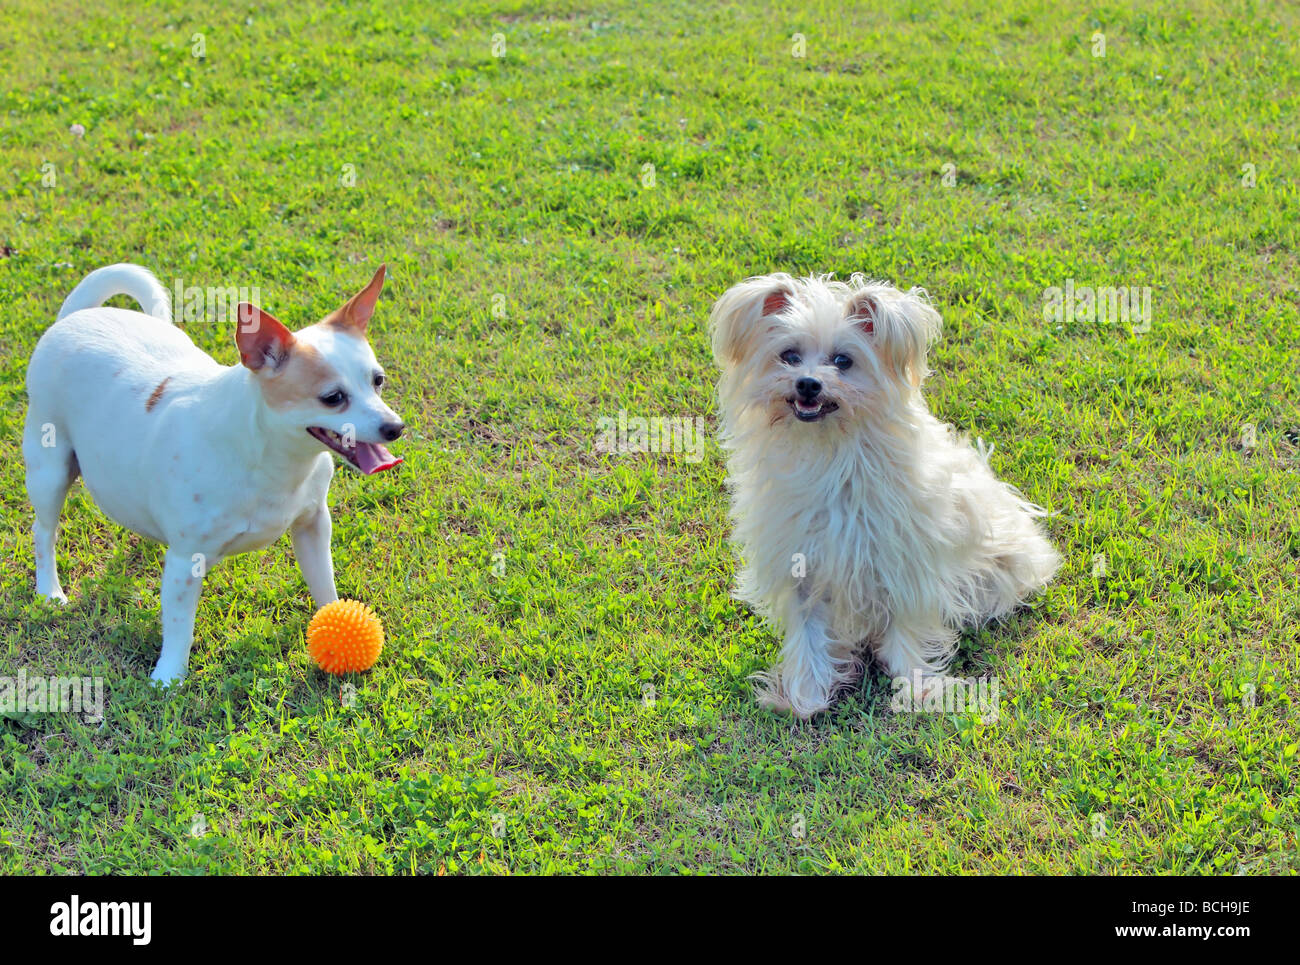 Small jack russell cross chihuahua dog on green grass and a small Australian silky terrier dog with a ball at play Stock Photo